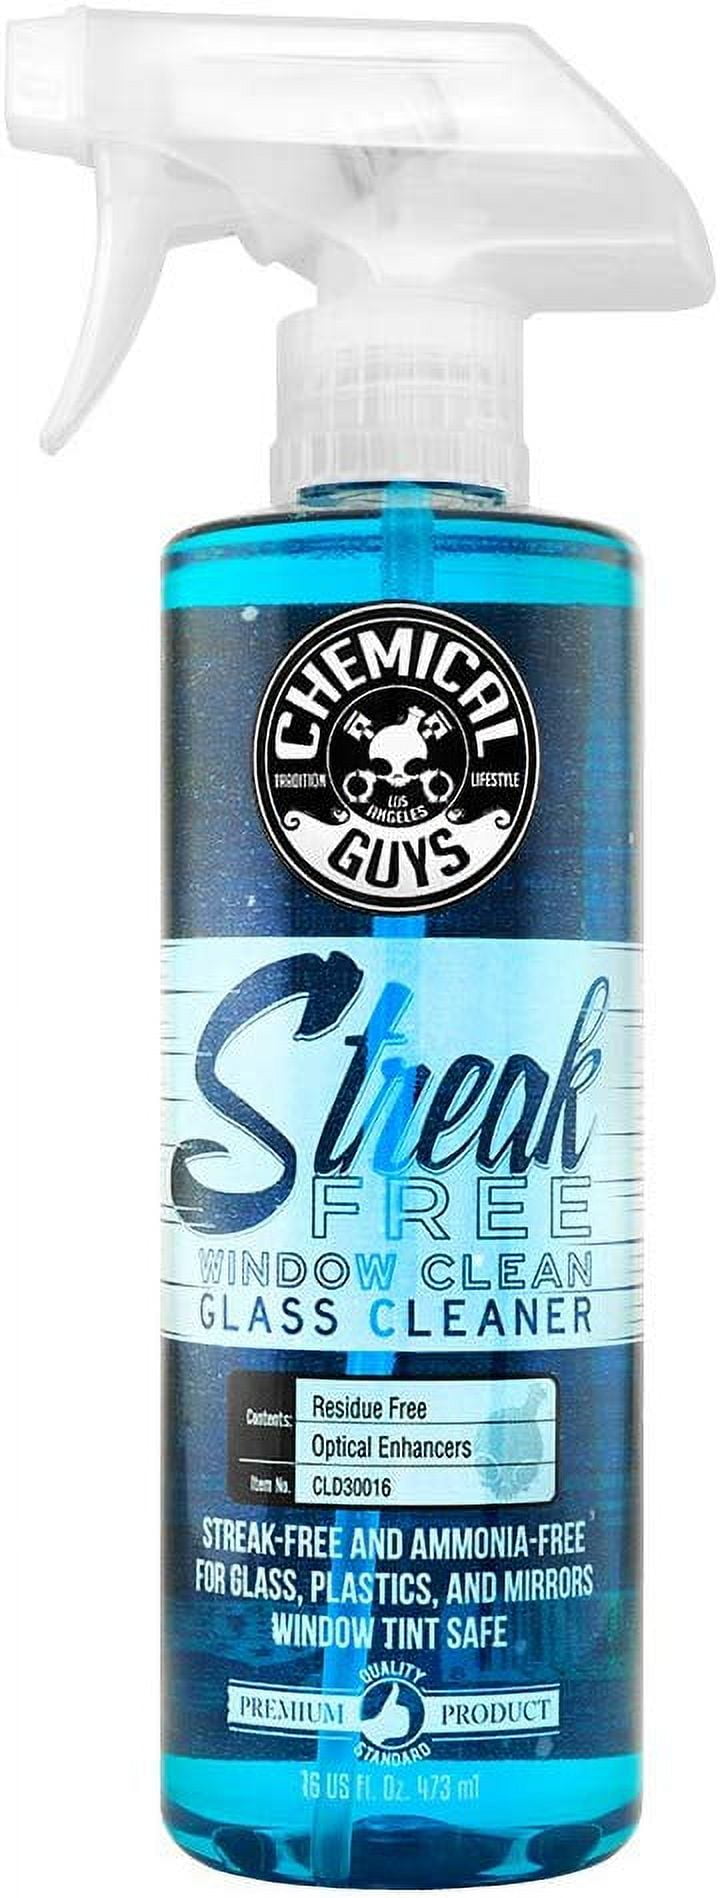 Chemical Guys - STREAK FREE GLASS CLEANER IS BACK IN